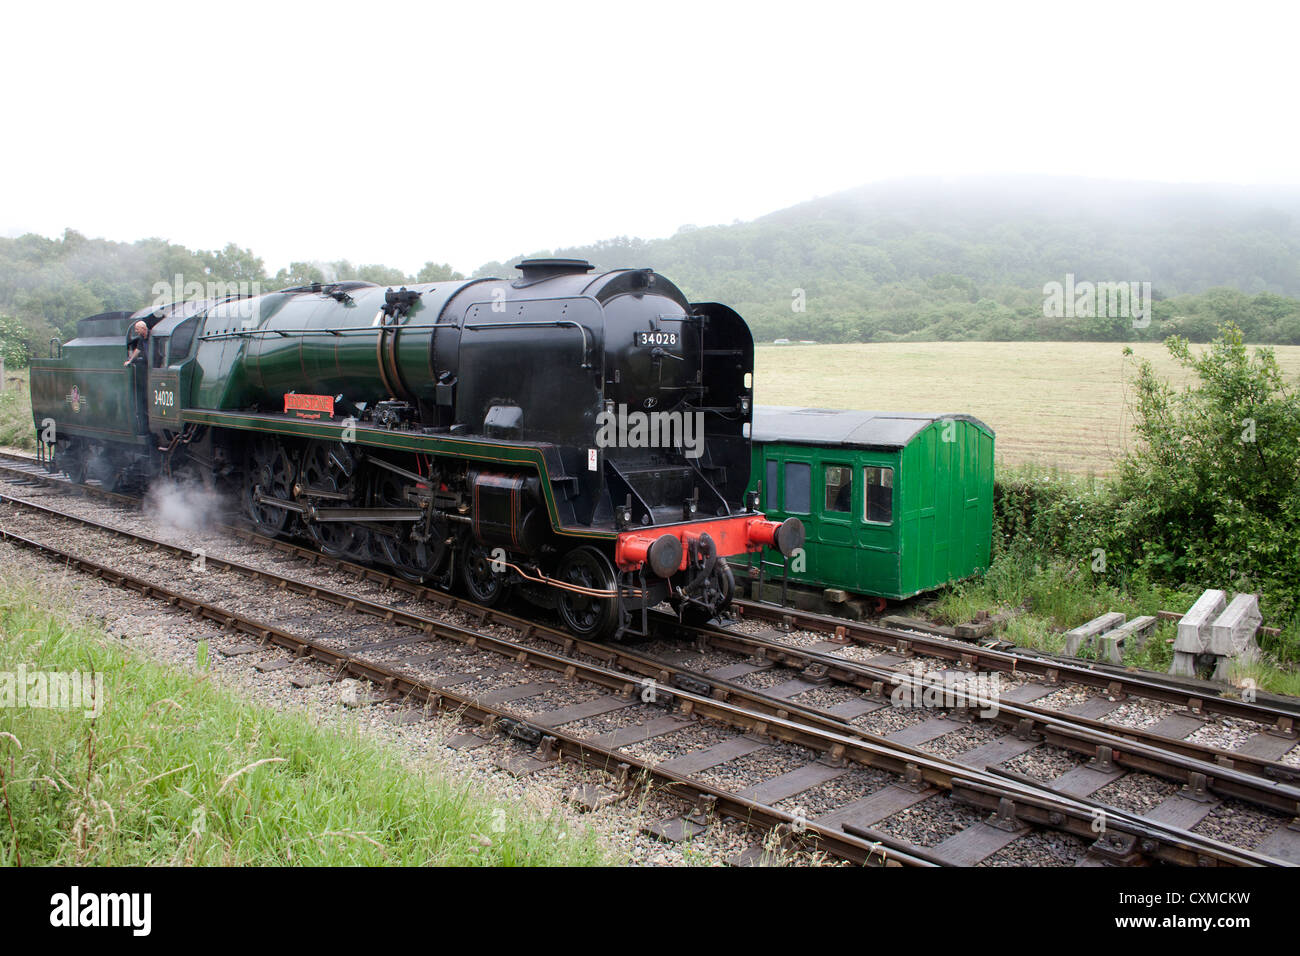 British Rail Southern Region West Country Class Pacific 4-6-2 34028 'Edystone' light engine Stock Photo